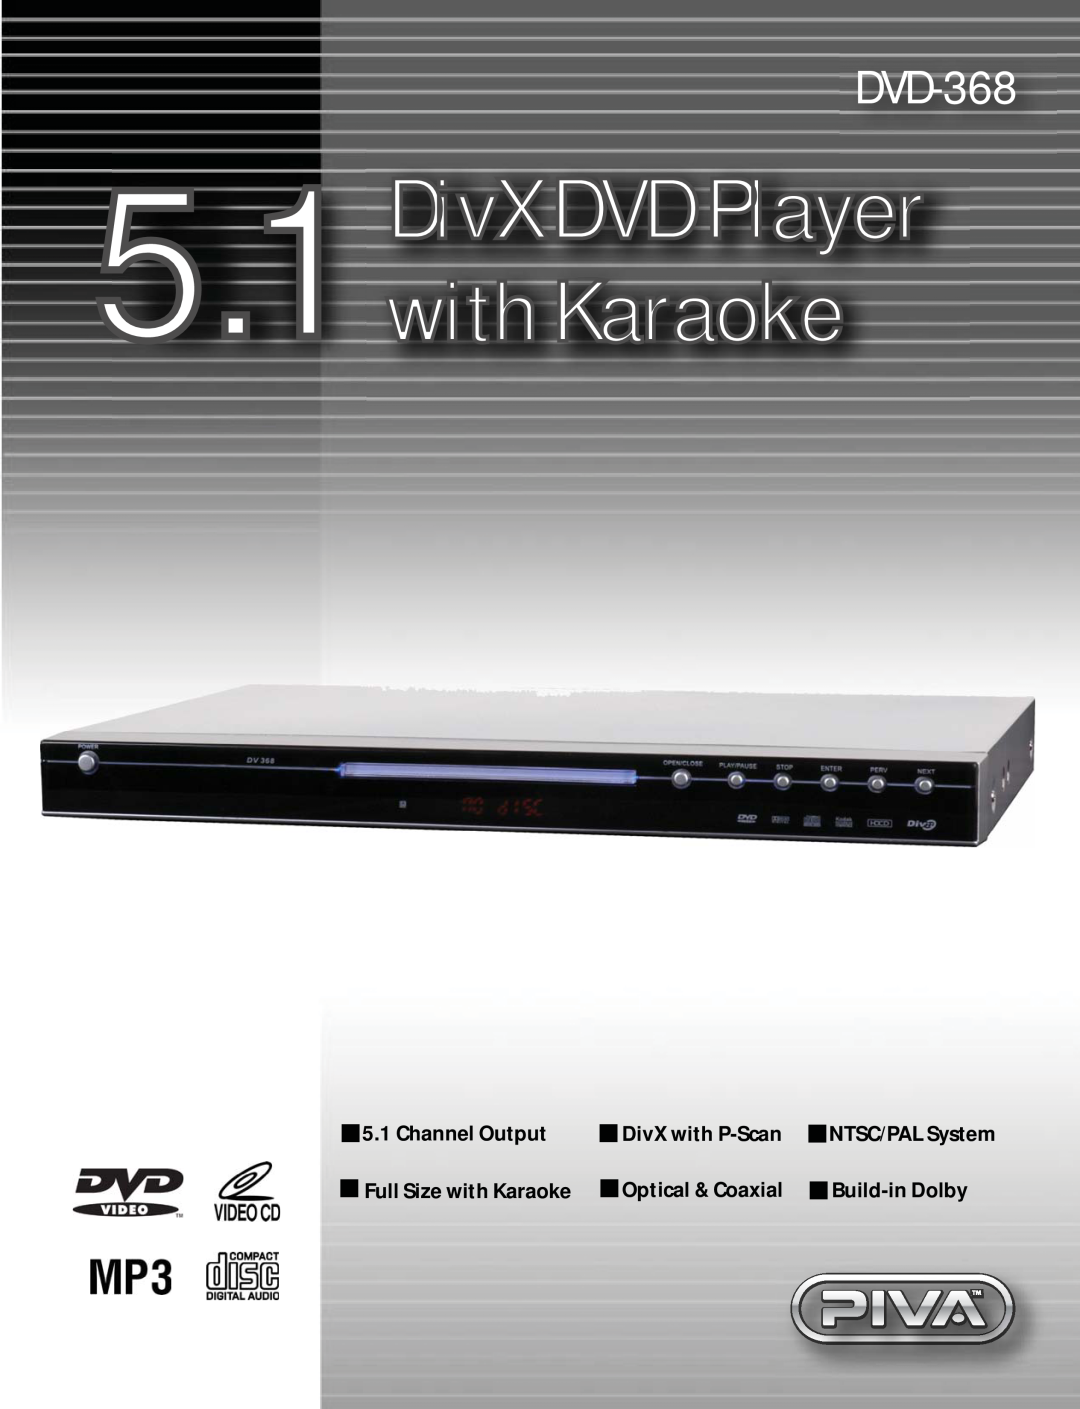 PIVA DVD-368 manual Channel Output, DivX with P-Scan, Full Size with Karaoke, Optical & Coaxial, Build-in Dolby 